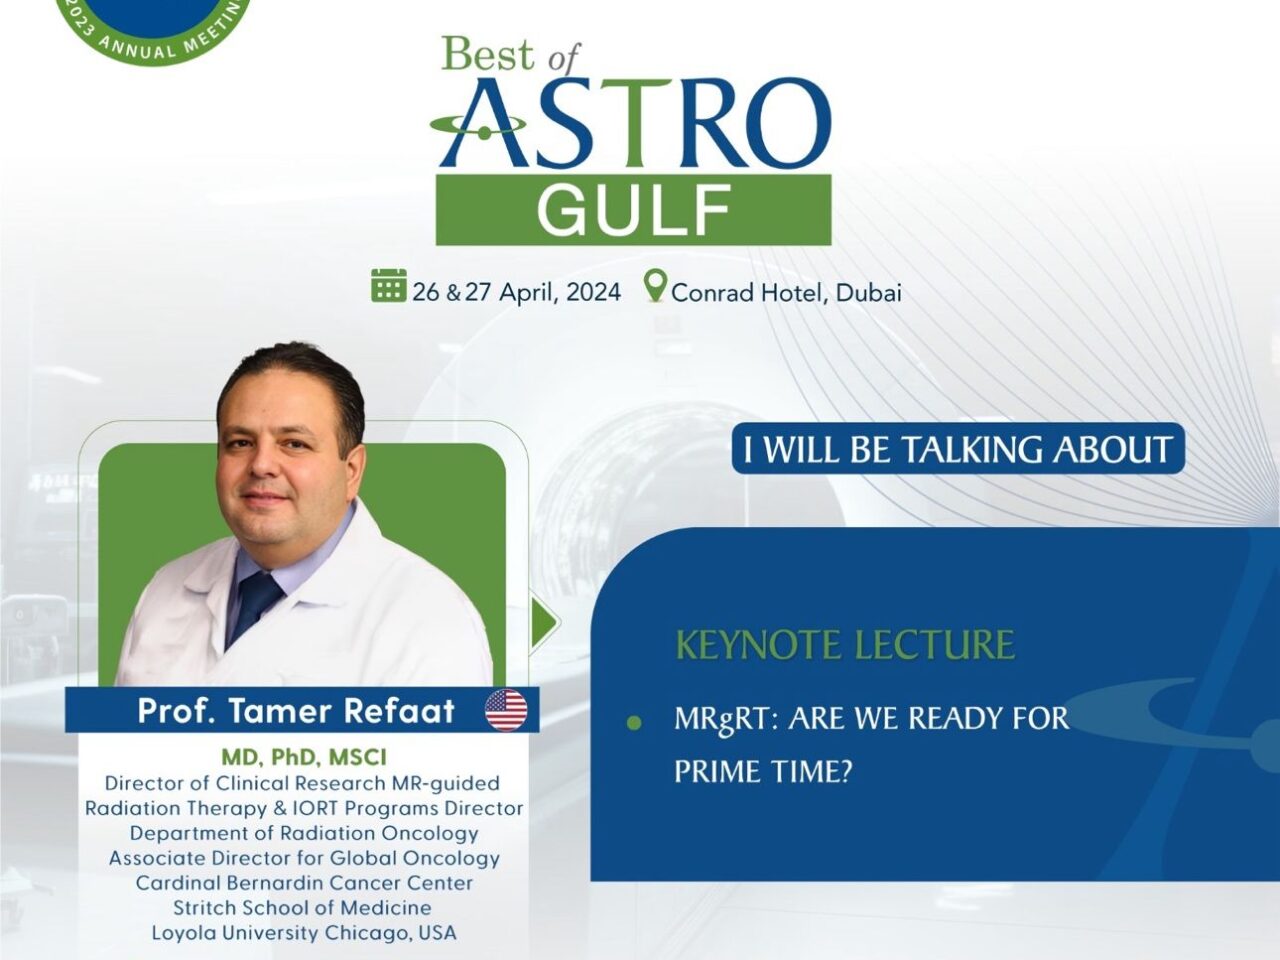 Tamer Refaat: Delighted to be invited to speak at the prestigious Best of ASTRO Gulf conference